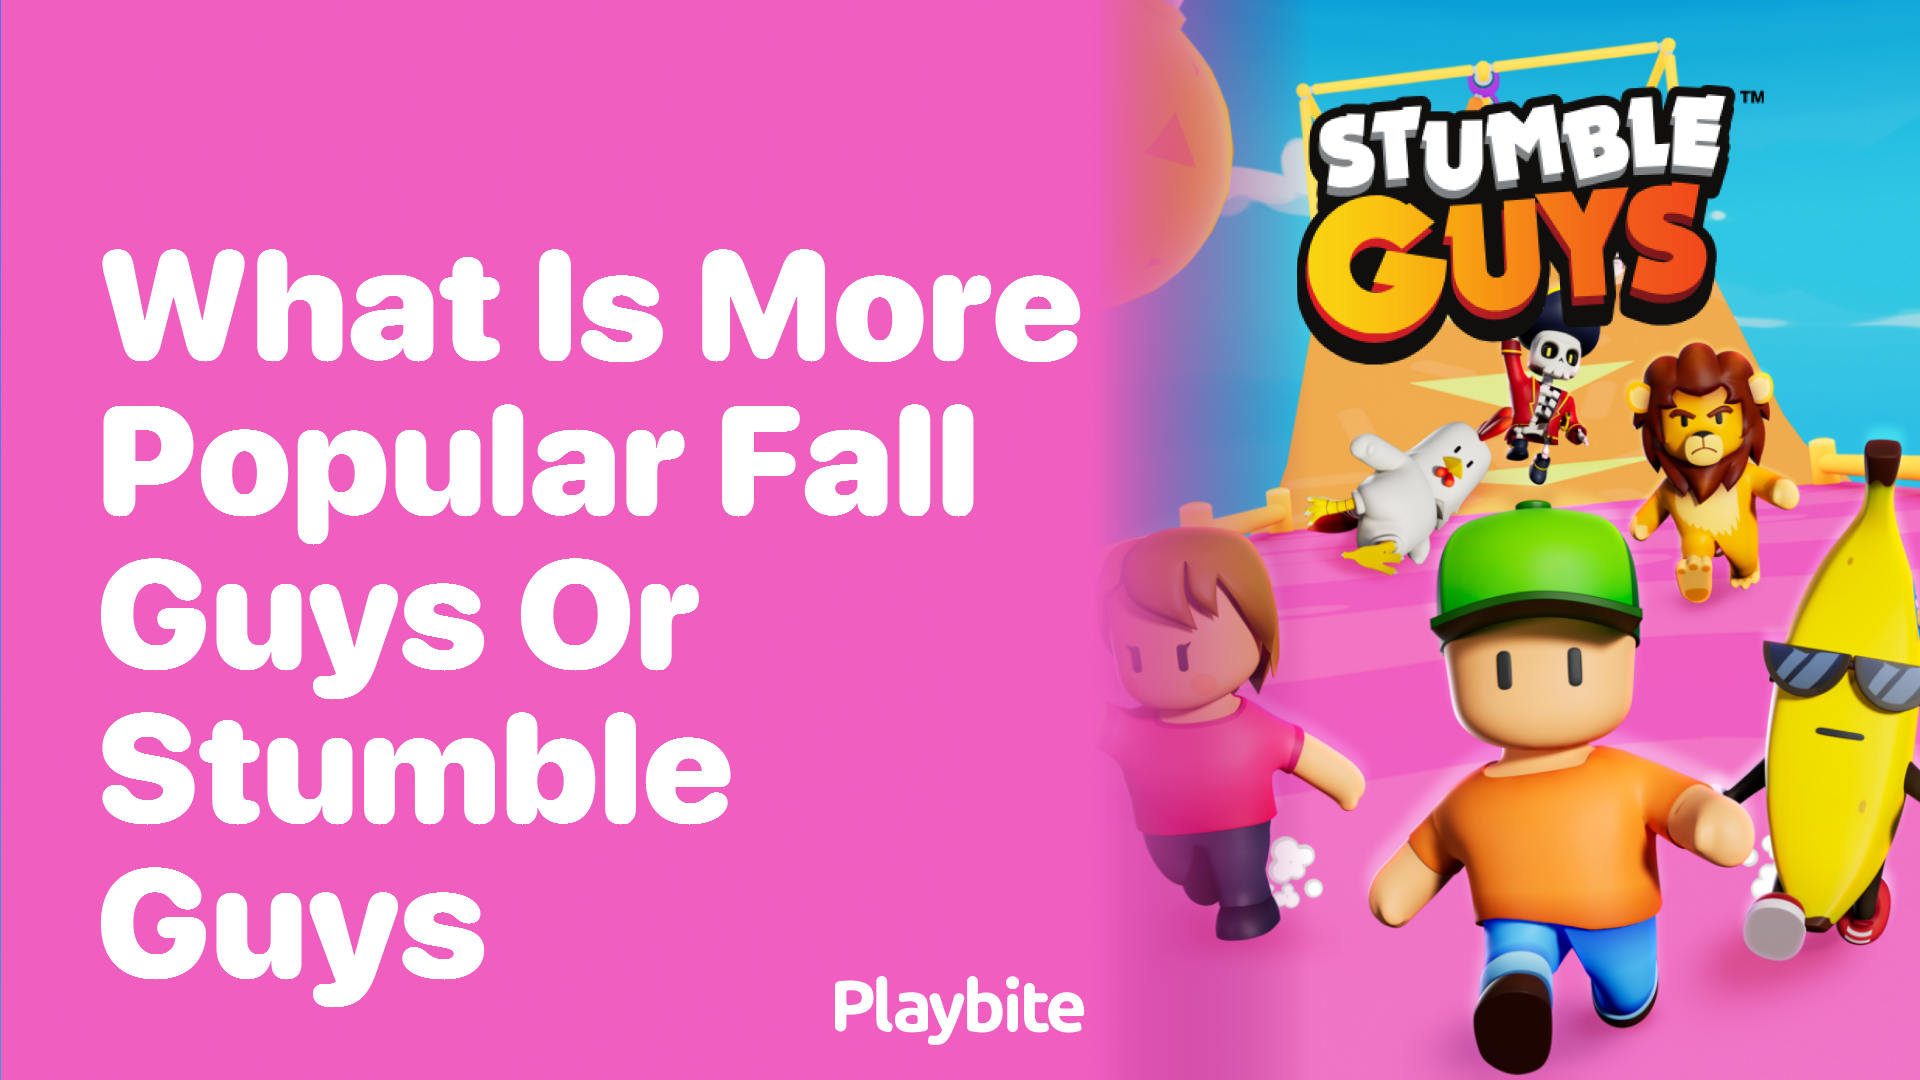 What Is More Popular: Fall Guys or Stumble Guys?